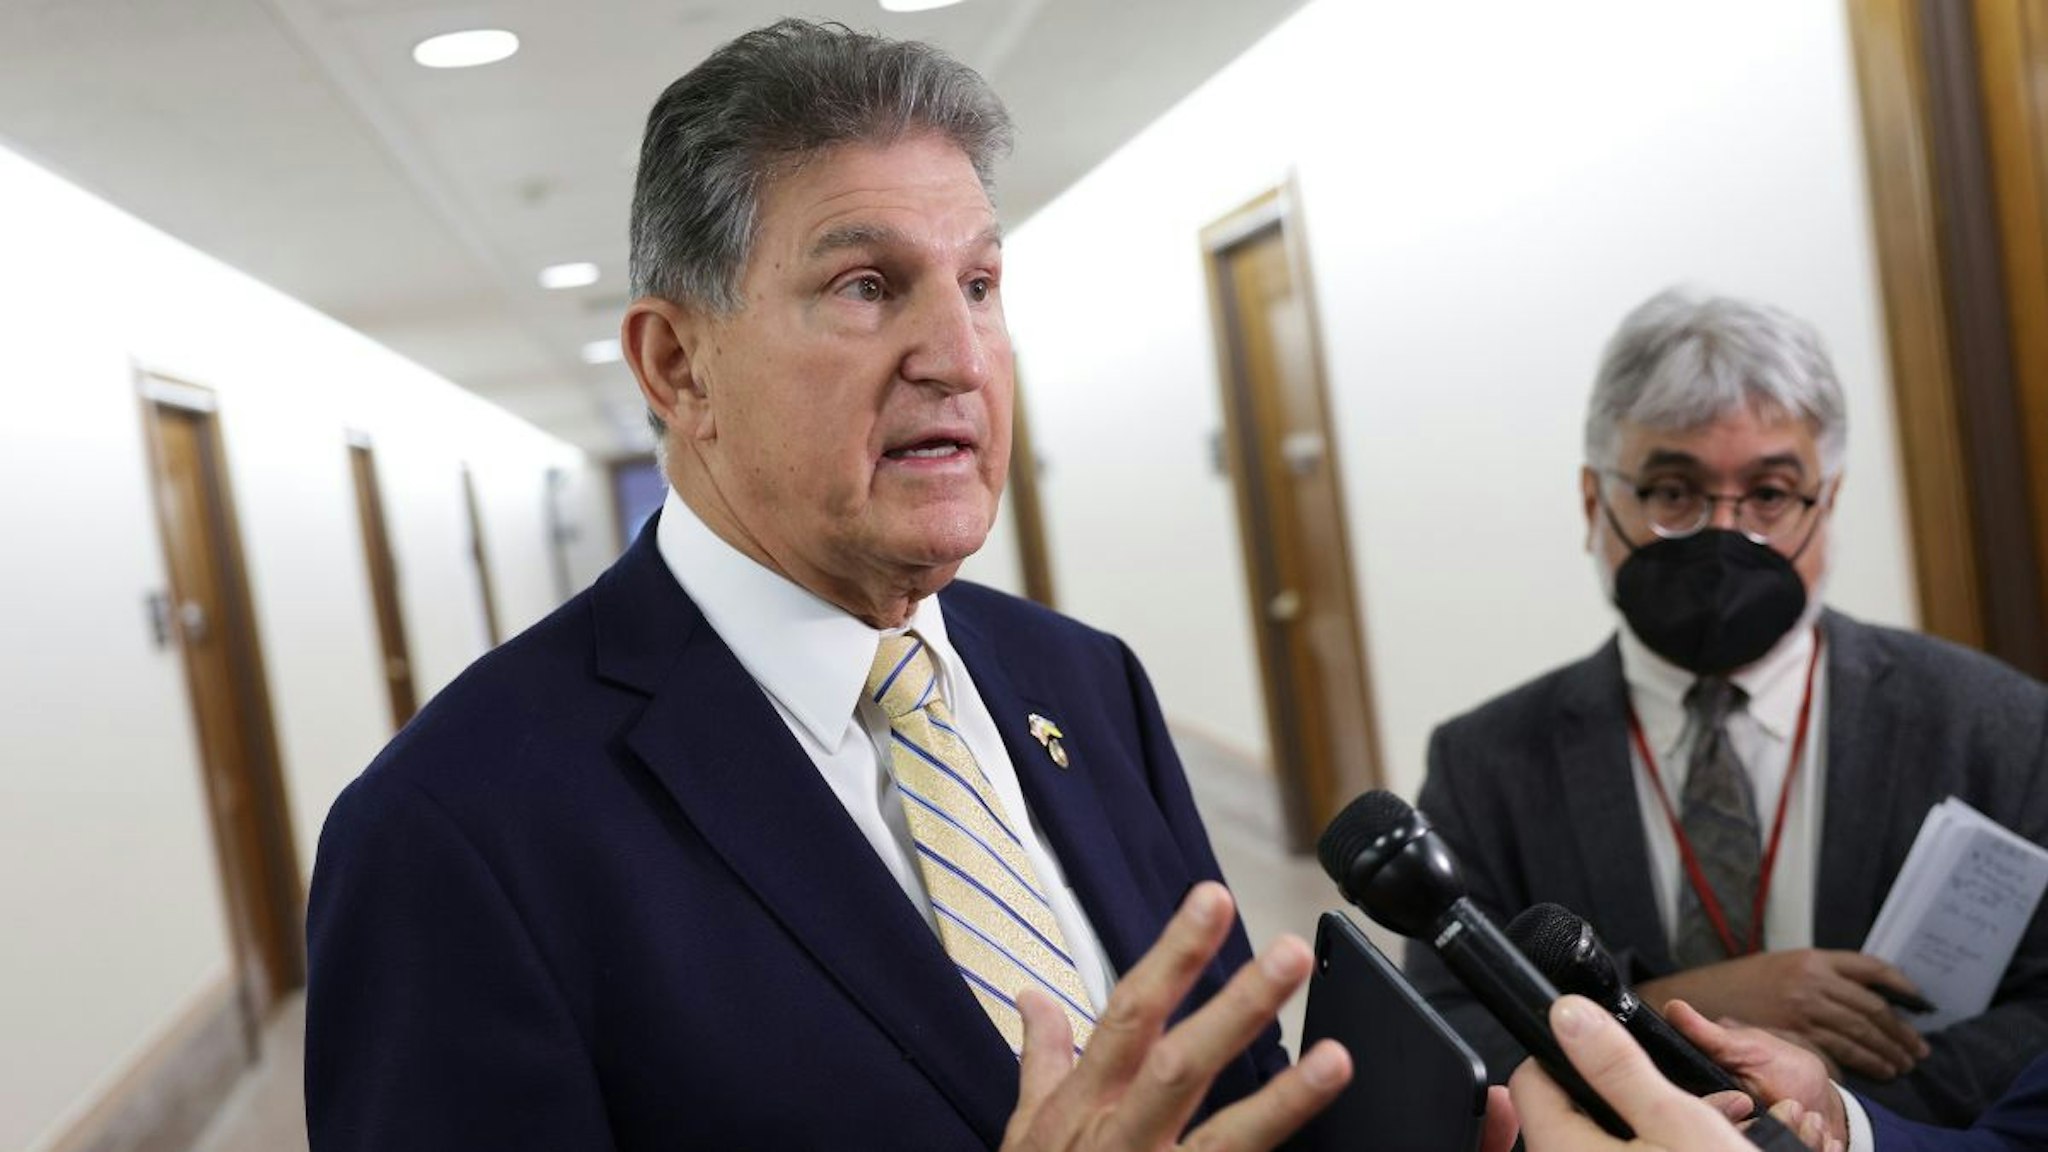 U.S. Sen. Joe Manchin (D-WV), Chairman of the Senate Energy and Natural Resources Committee, talks to reporters before a hearing with Interior Secretary Deb Haaland, at the Dirksen Senate Office Building on May 19, 2022 in Washington, DC.